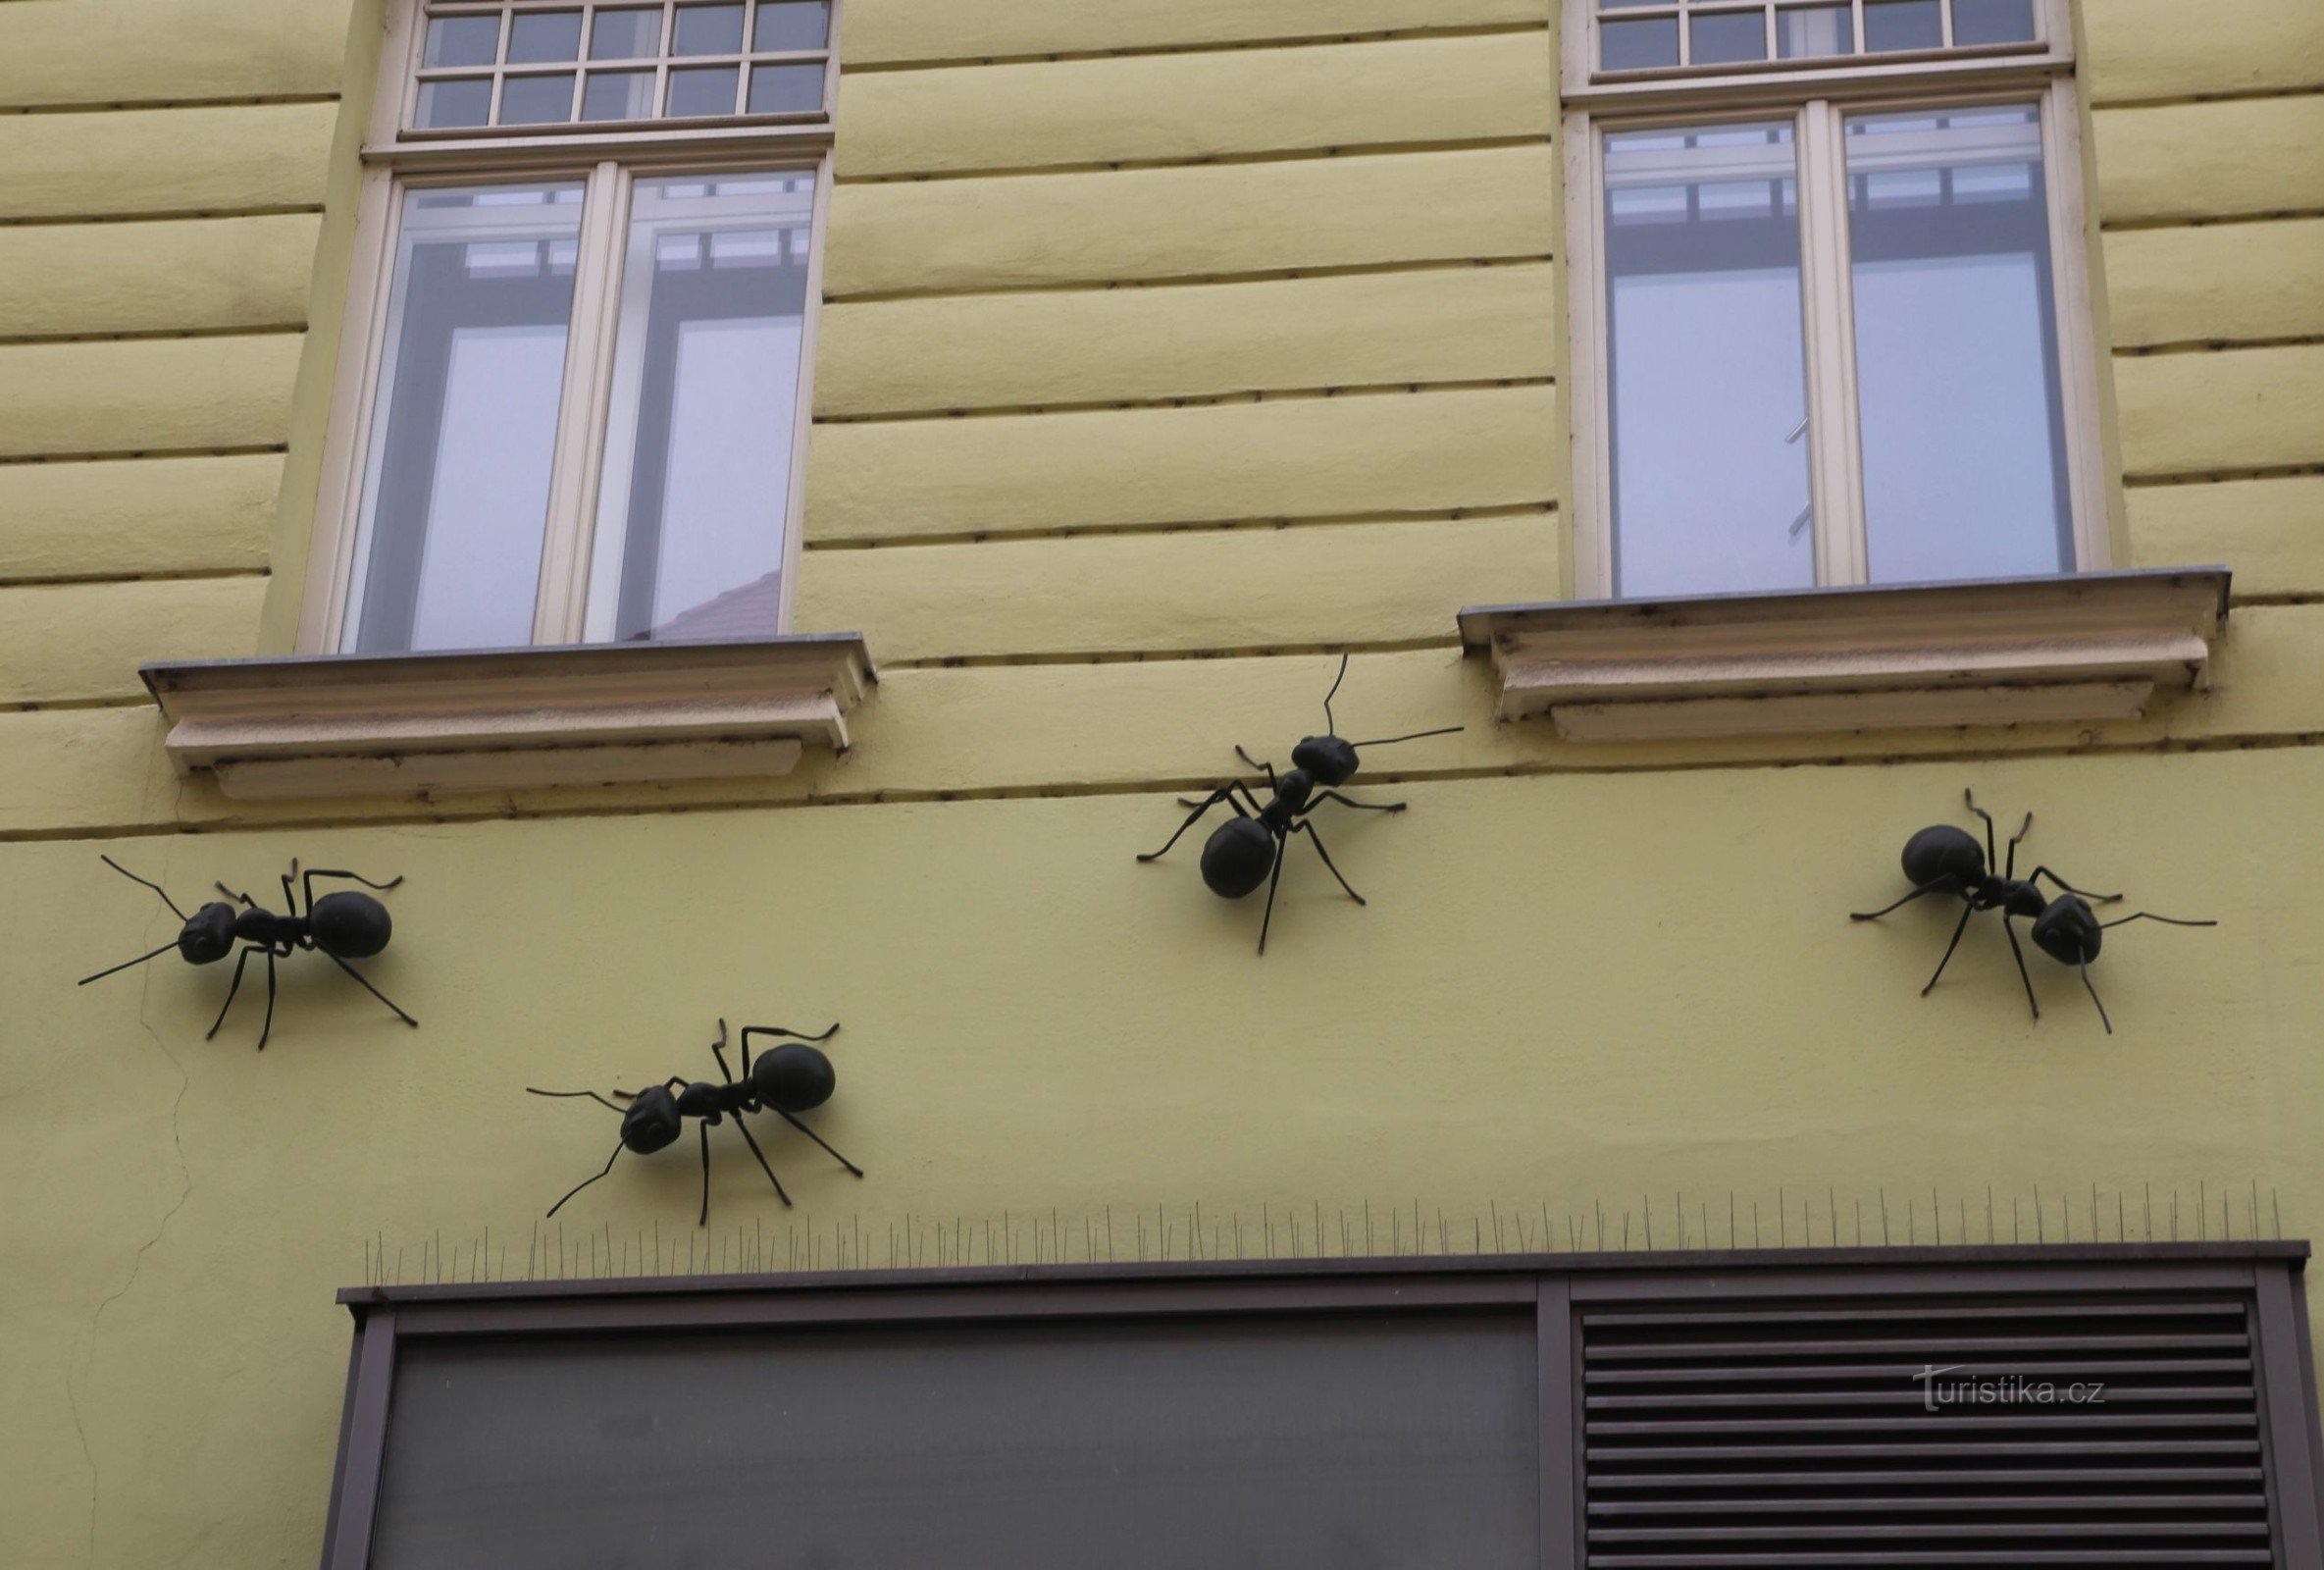 Sculptures of ants on the facade